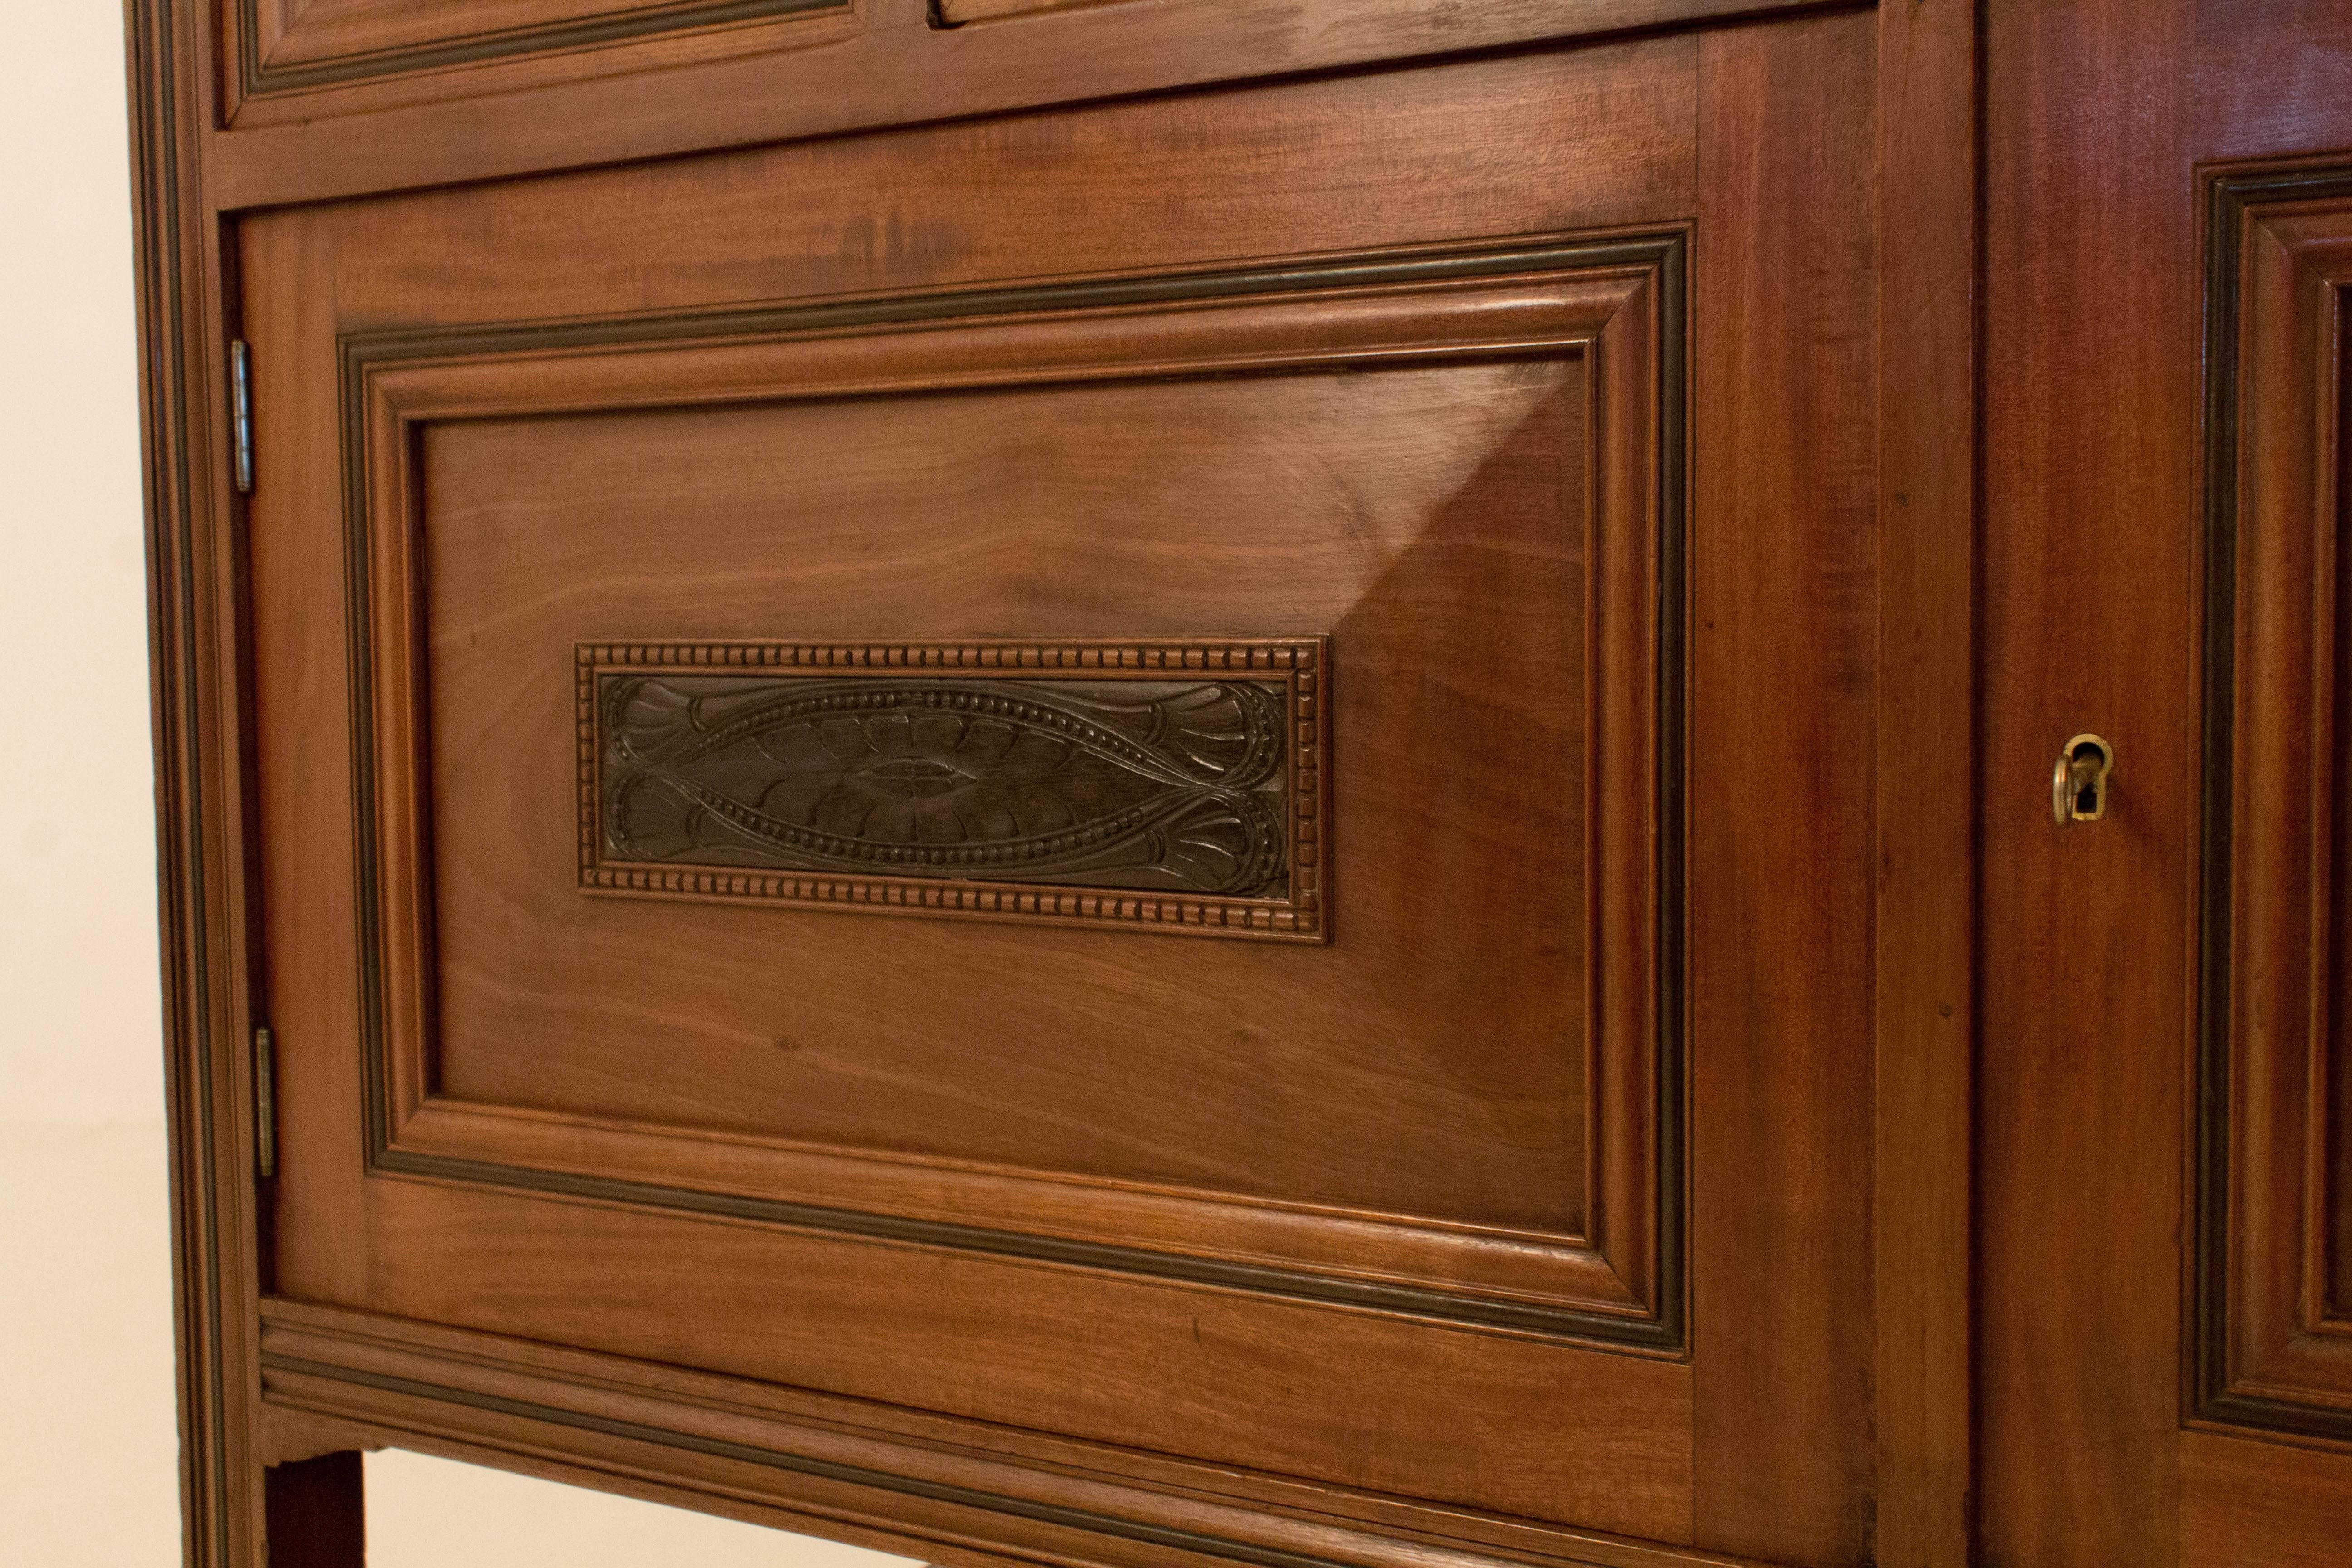 Elegant Art Nouveau sideboard attributed to KPC de Bazel.
Solid mahogany and Macassar ebony knobs and details.
Lock and key are in good working order.
In good original condition.